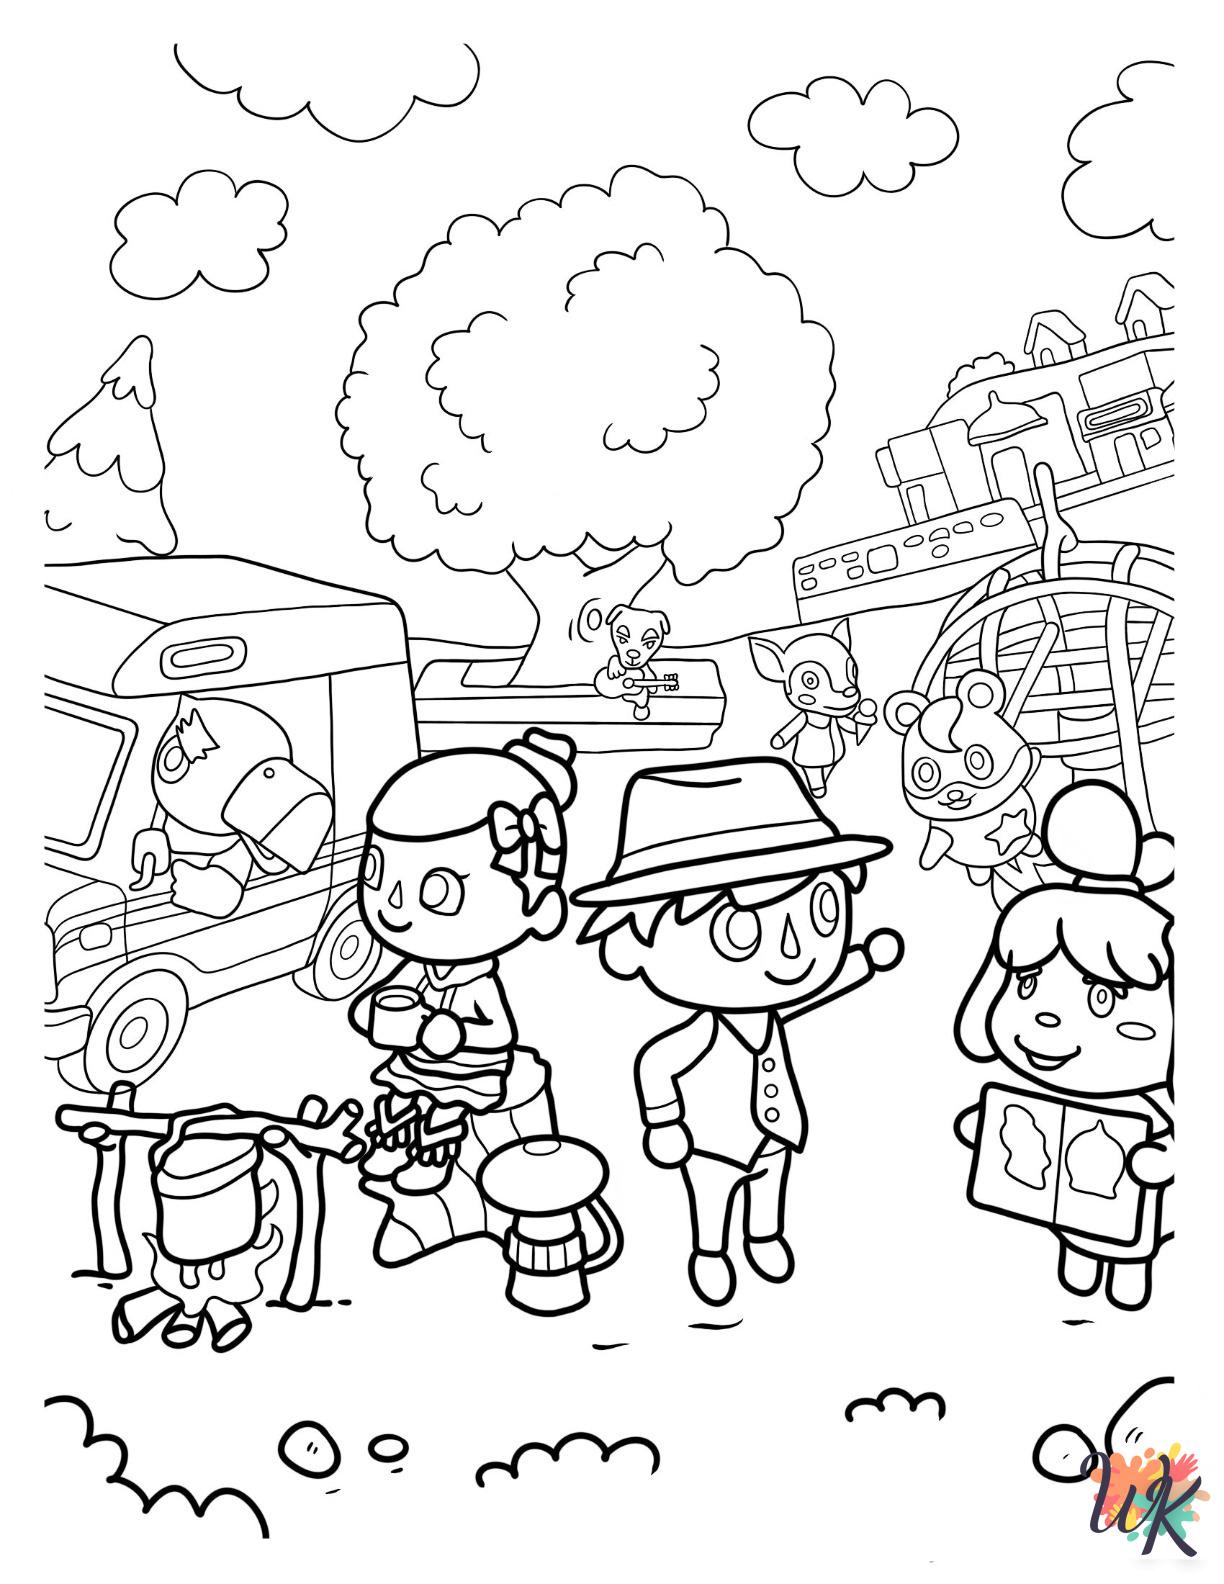 Animal Crossing coloring pages for kids